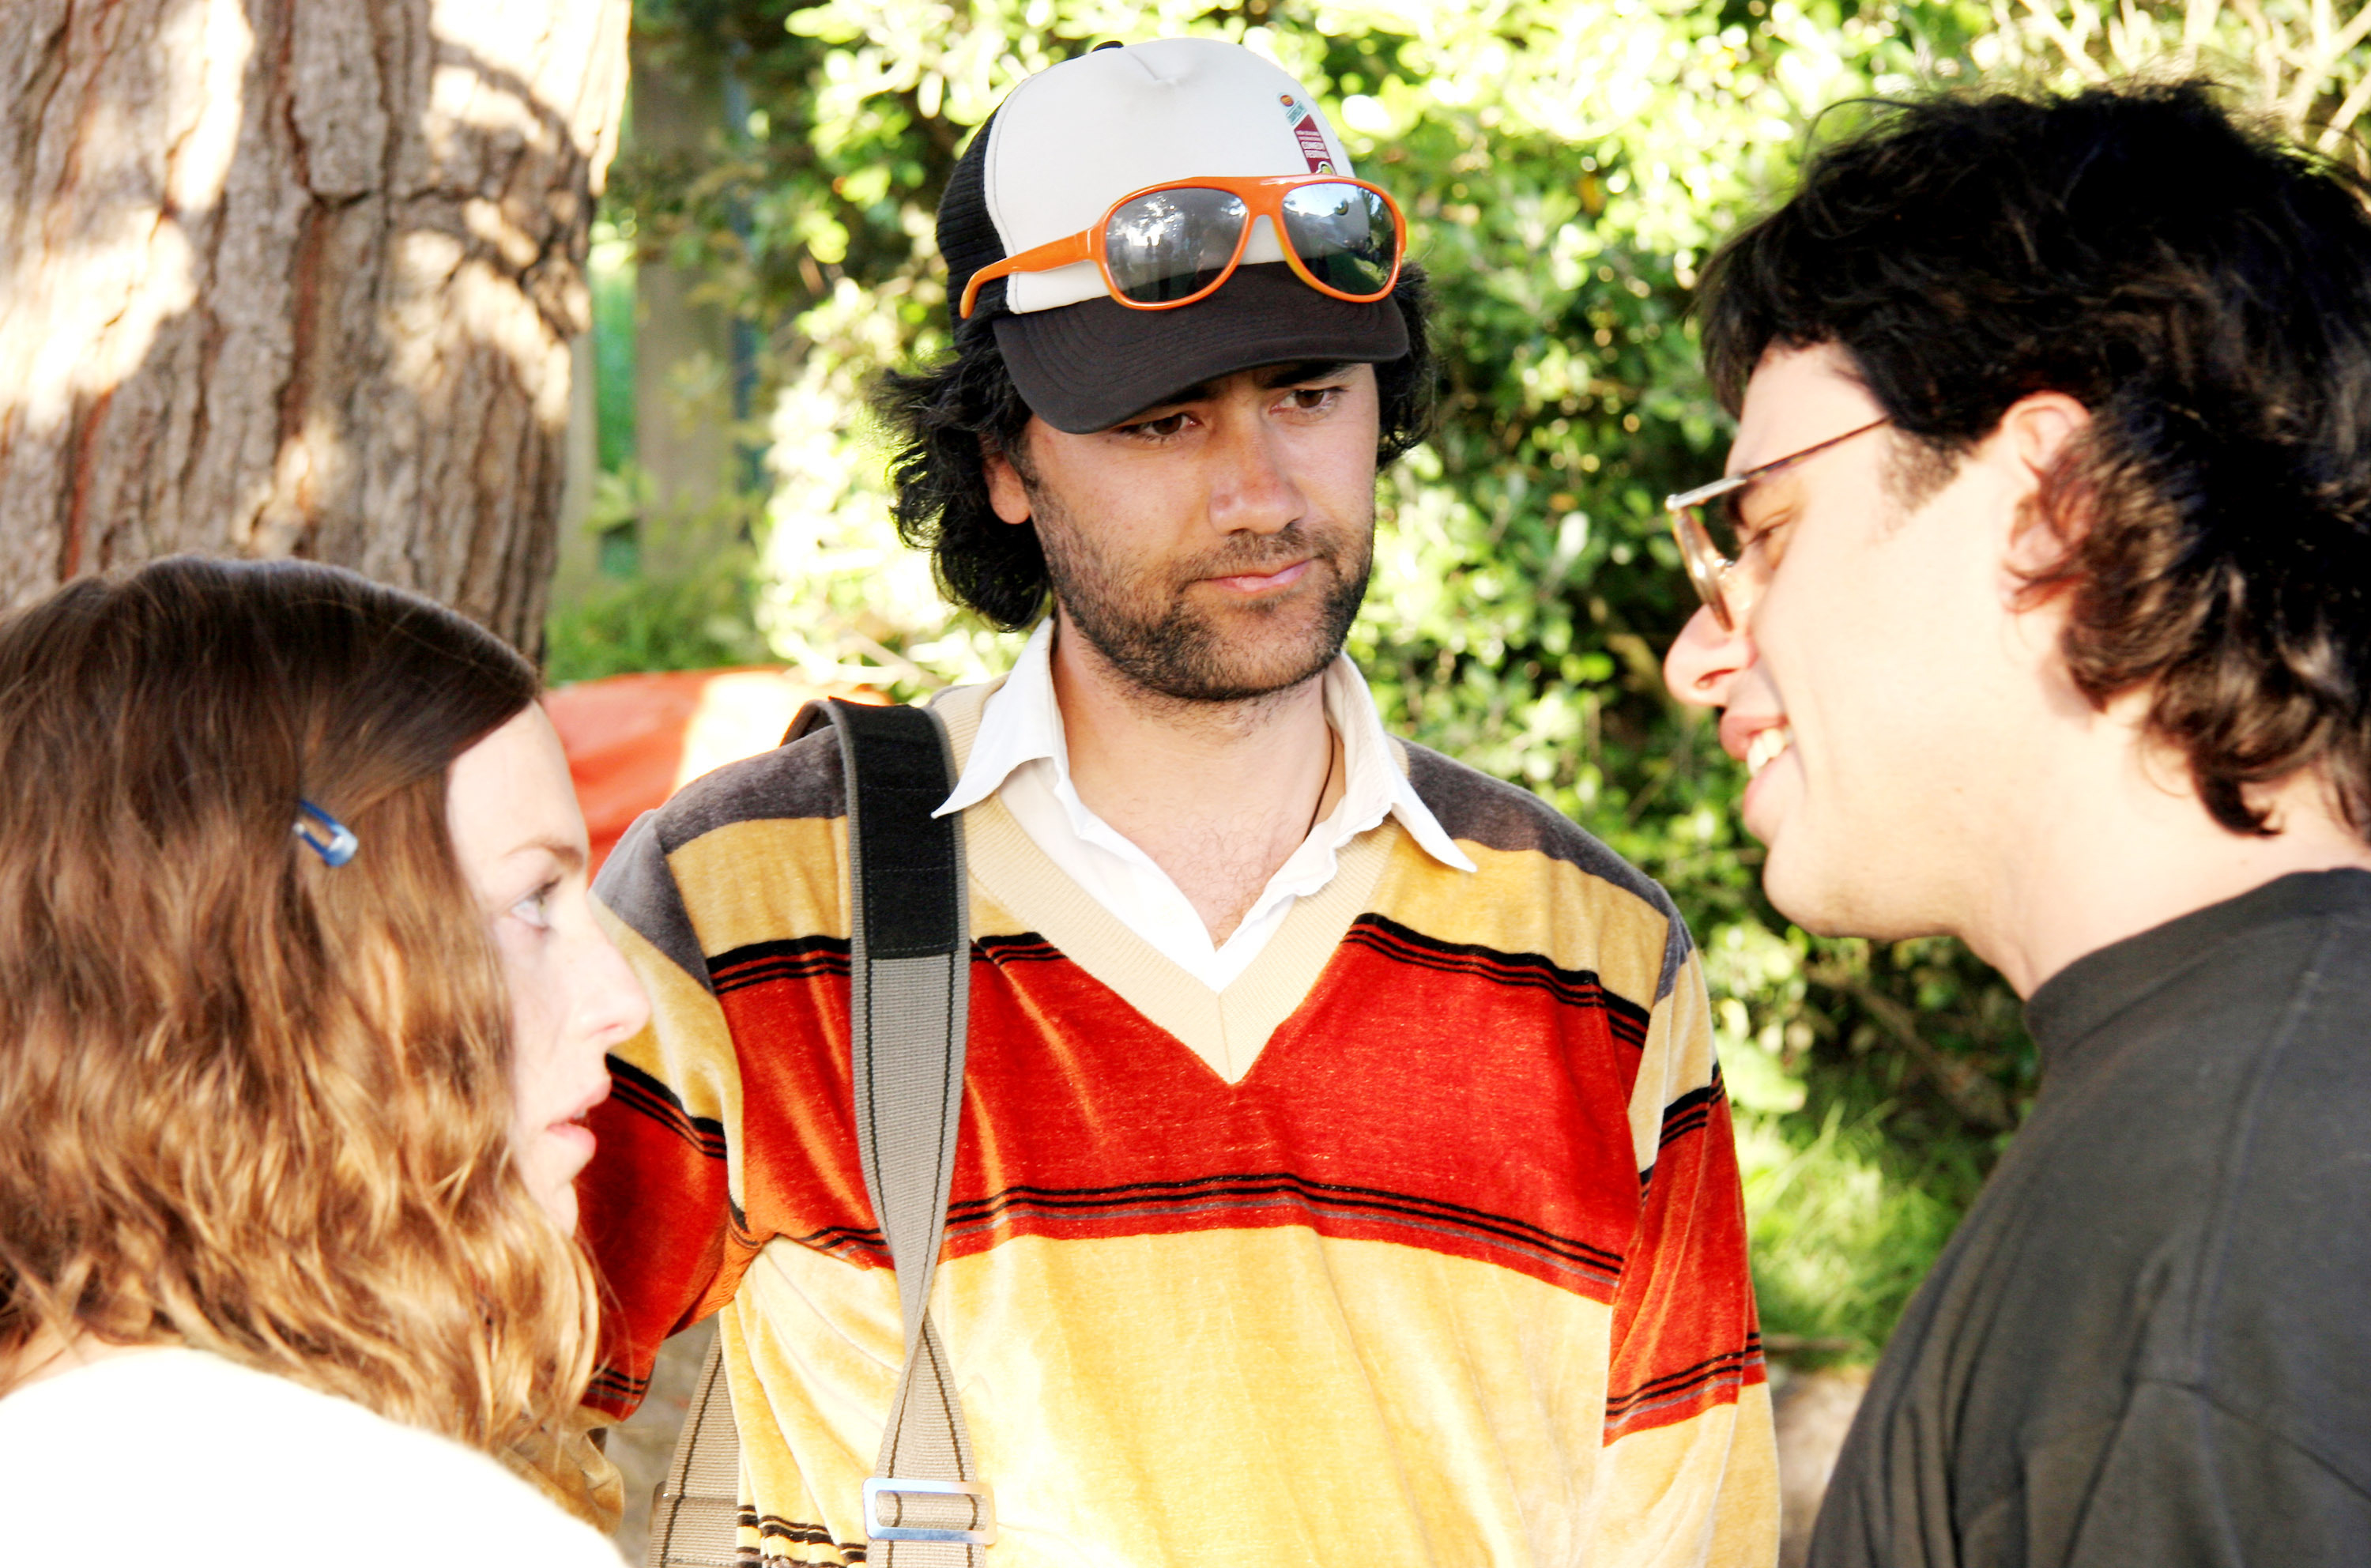 Loren Horsley, director Taika Cohen and Jemaine Clement engaging in conversation outdoors, one wearing a striped shirt and cap with sunglasses